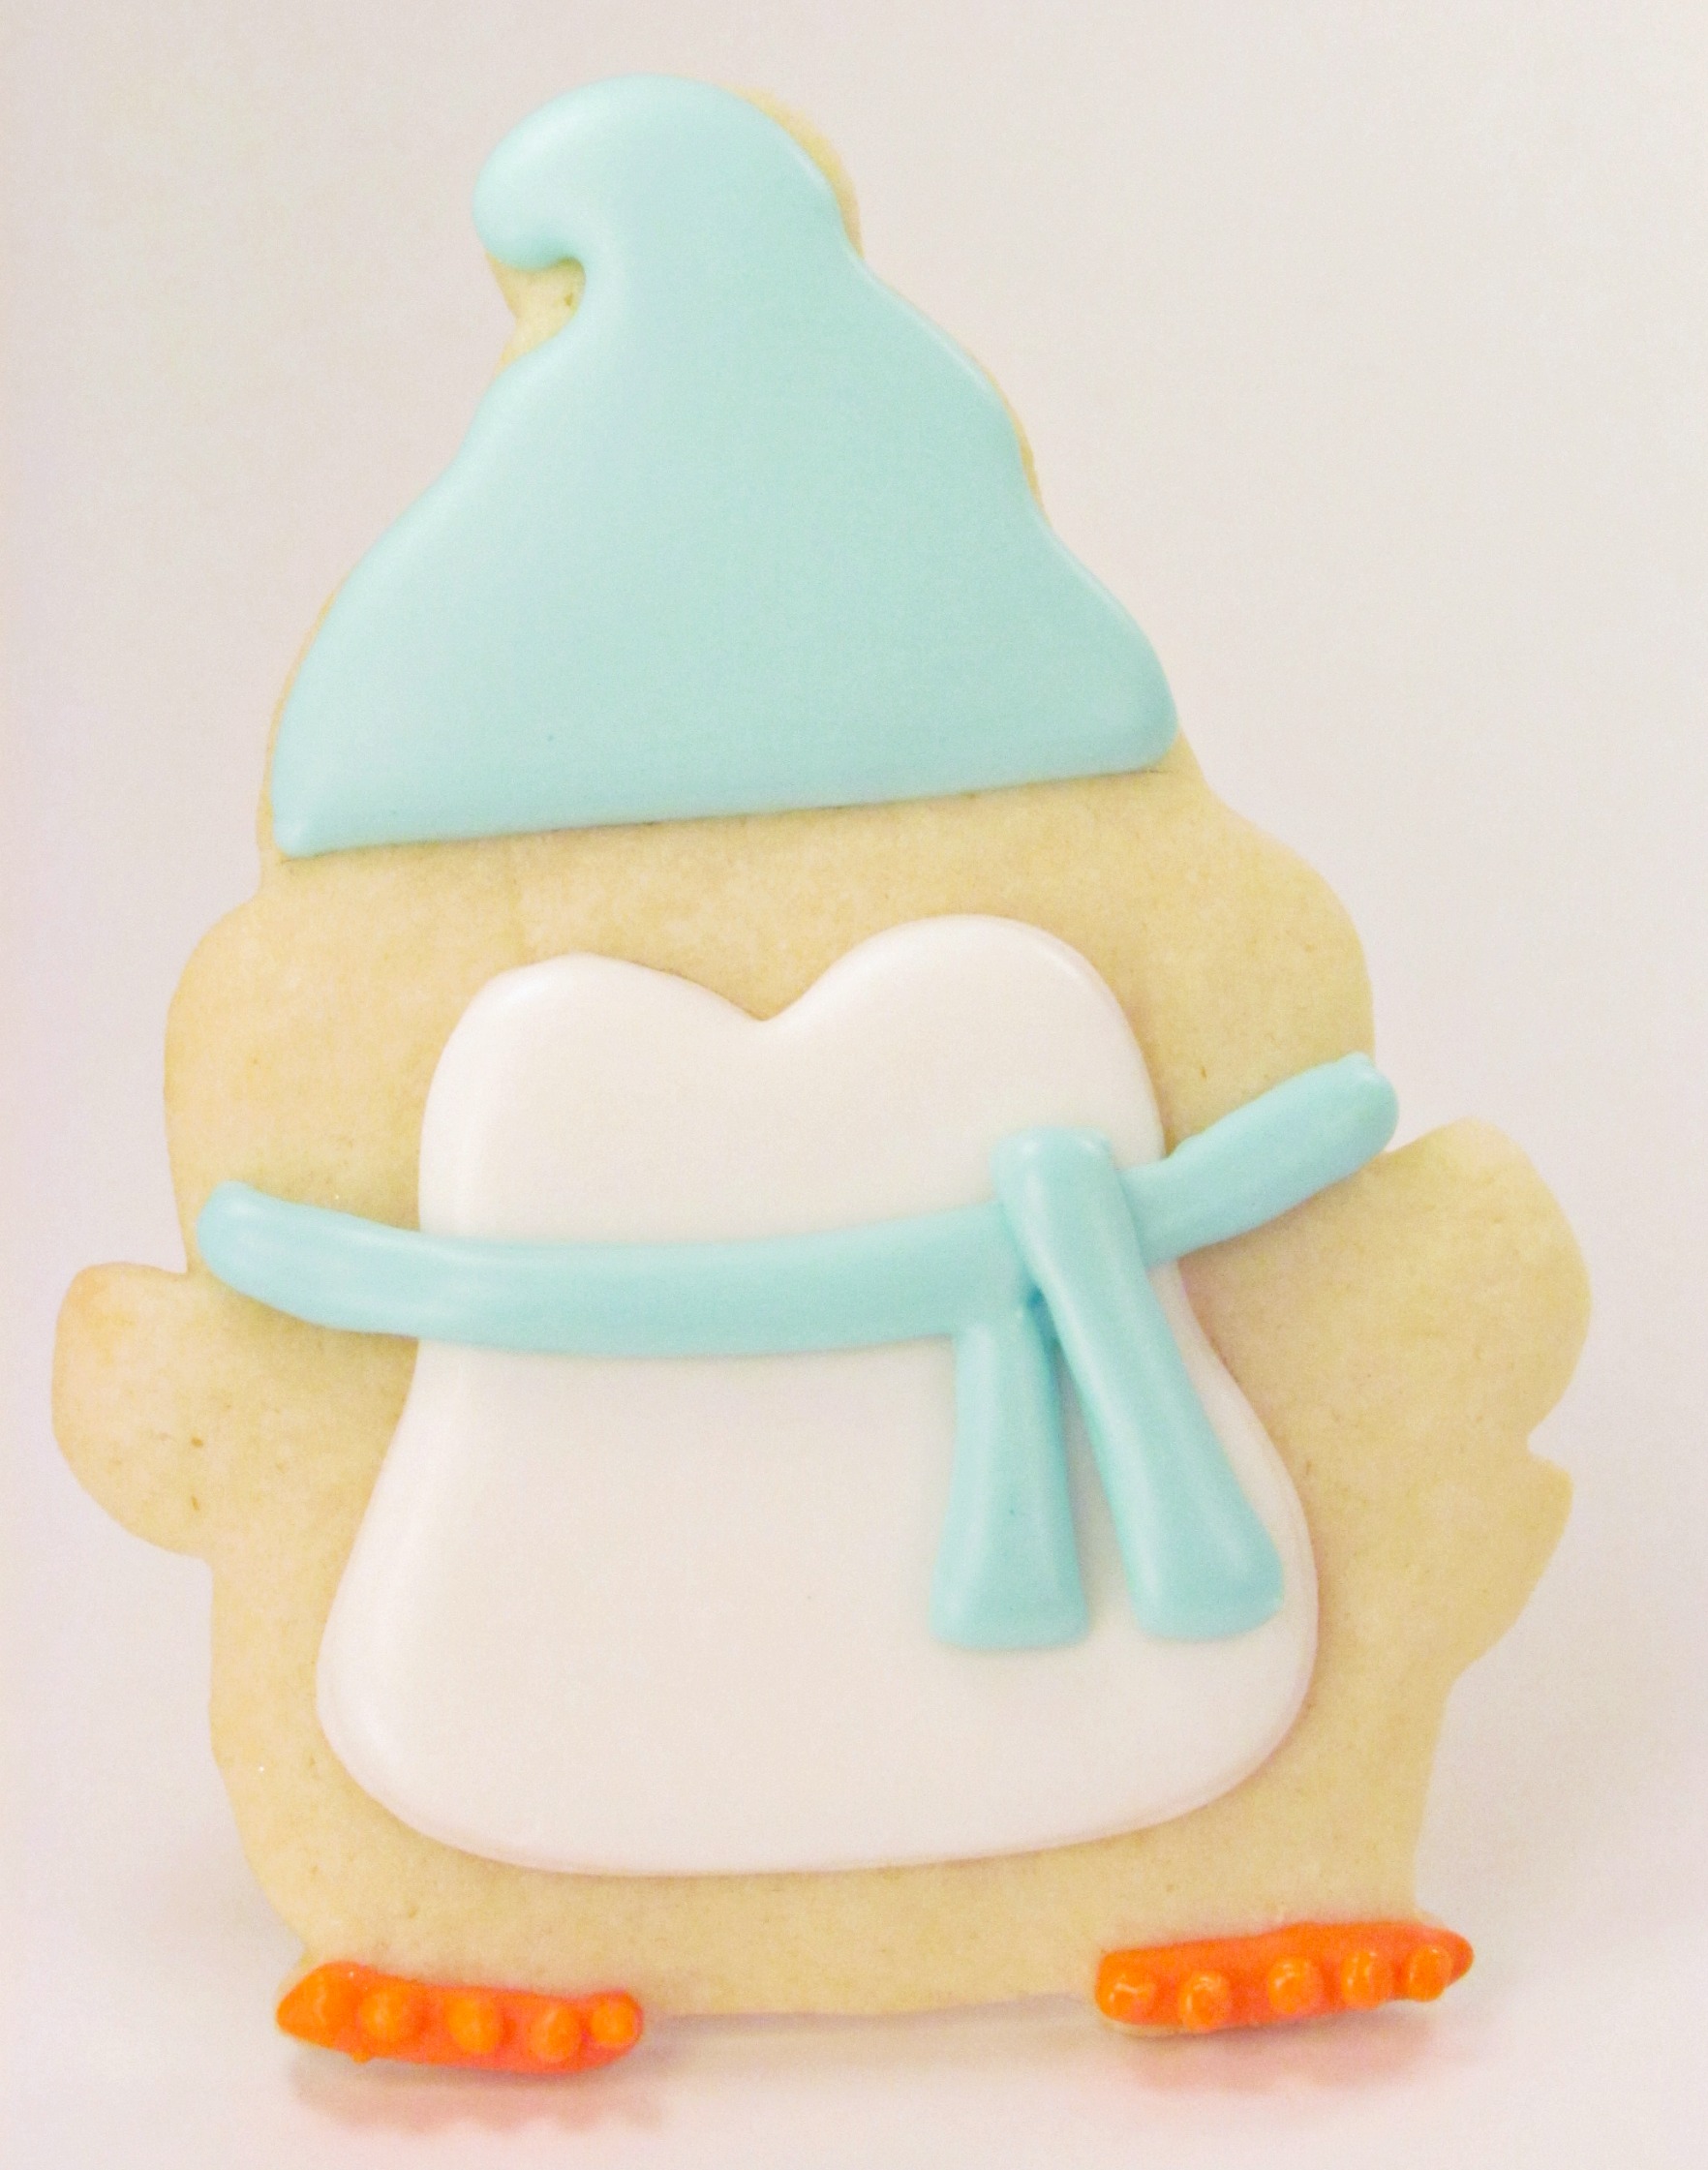 Penguin Cookies by The Bearfoot Baker